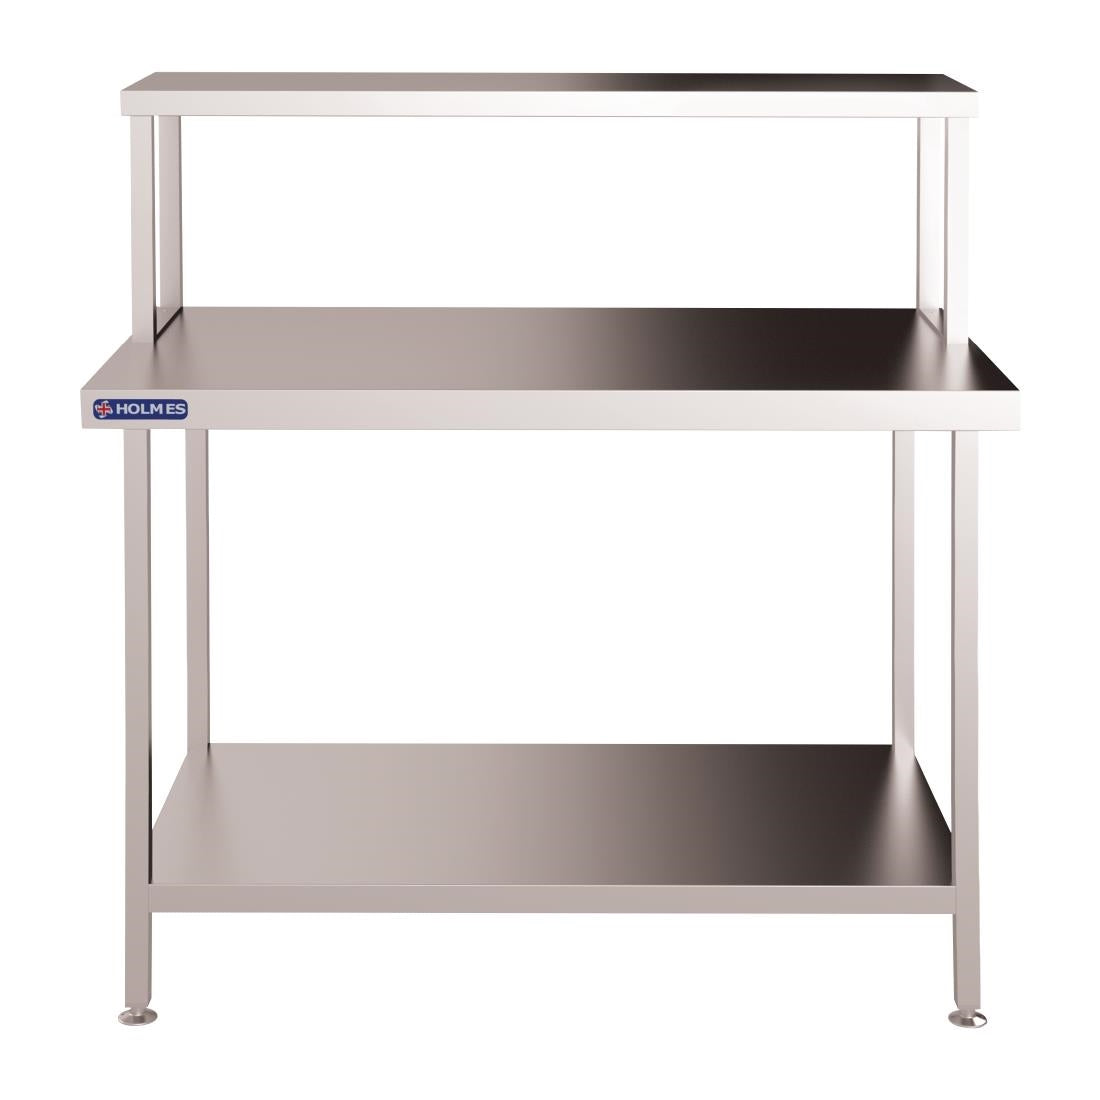 FC442 Holmes Stainless Steel Wall Table Welded with Gantry 1500mm JD Catering Equipment Solutions Ltd